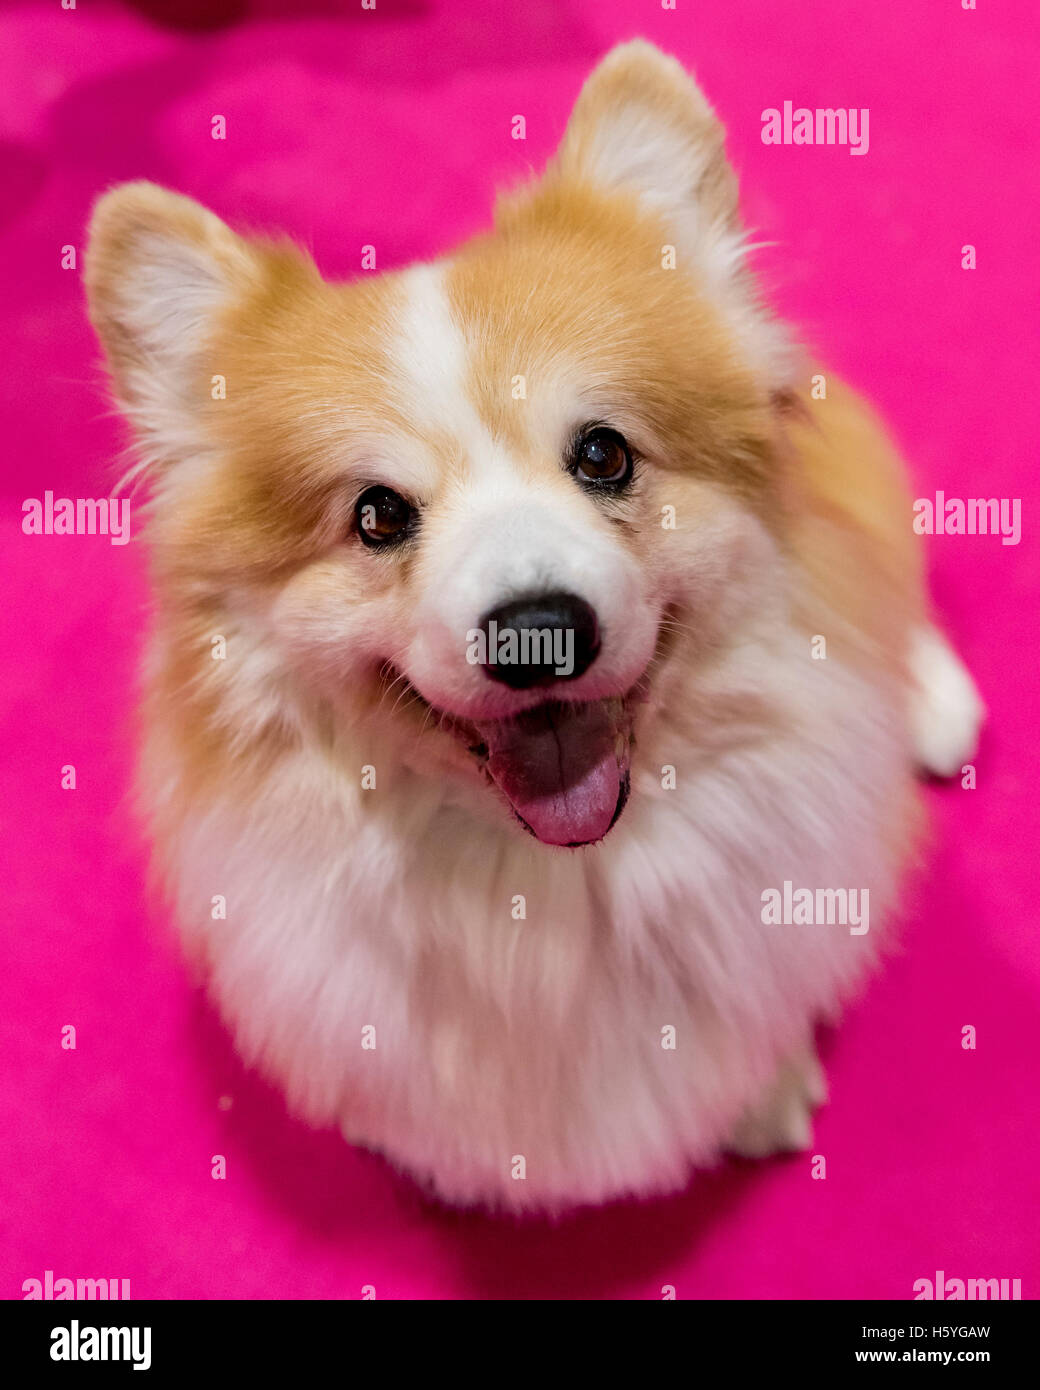 London, UK.  22 October 2016. A Welsh Pembroke Corgi poses.  Thousands of dog lovers visit the Excel Centre for the Eukanuba Discover Dogs show where over 200 breeds are on show, together with all dog related activities and accessories.  Credit:  Stephen Chung / Alamy Live News Stock Photo